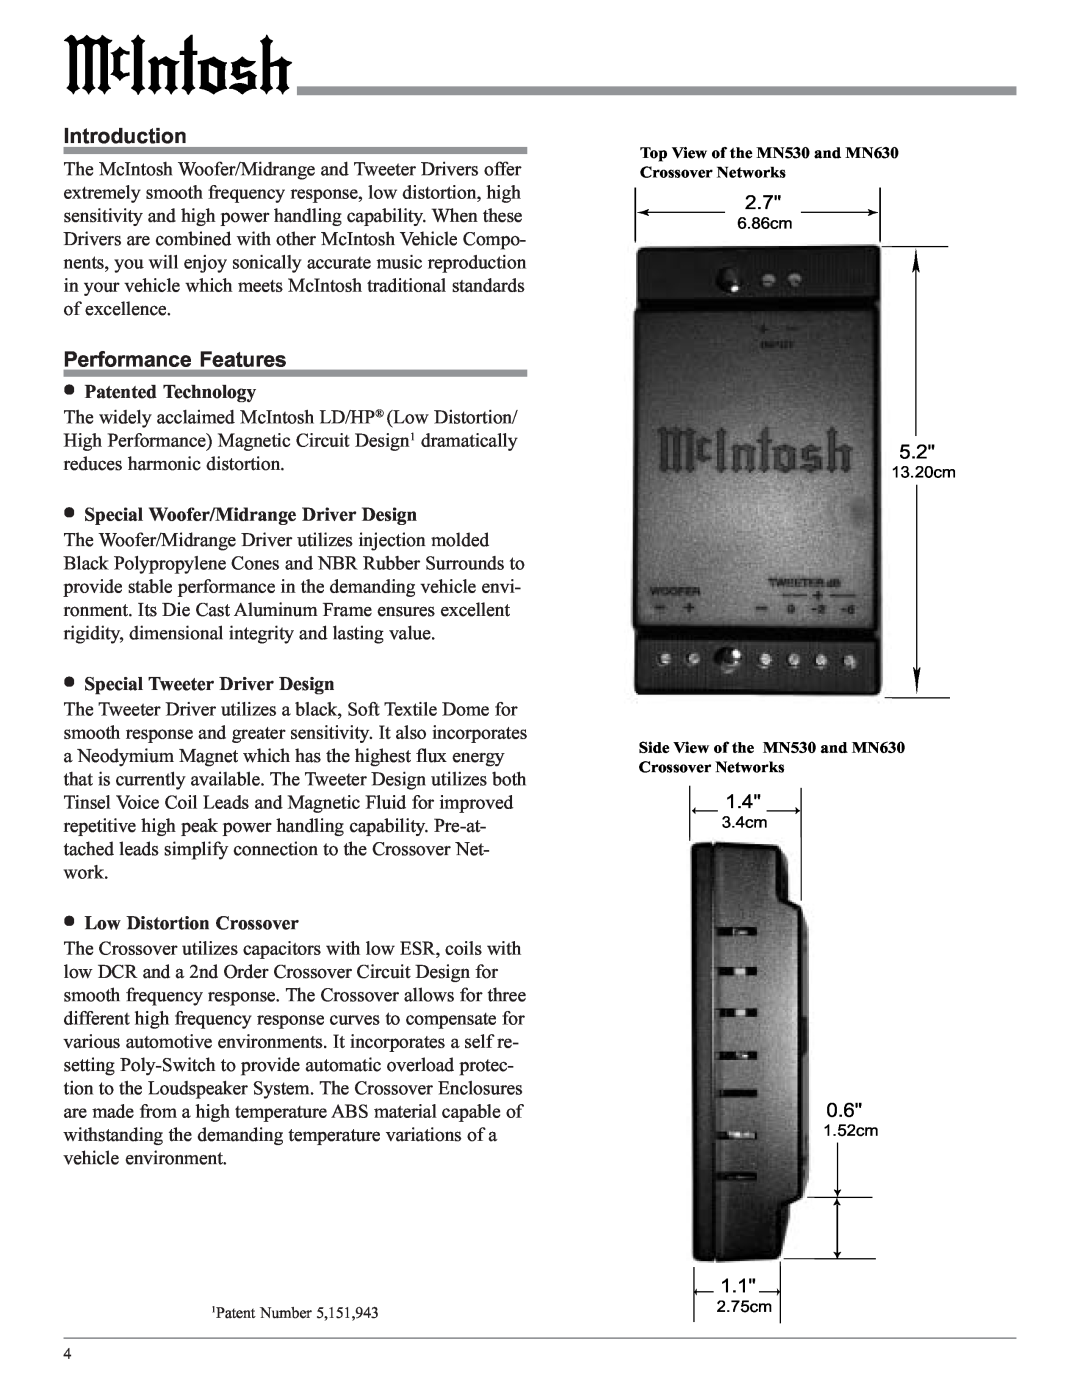 McIntosh MSS630, MSS530 owner manual Introduction, Performance Features 